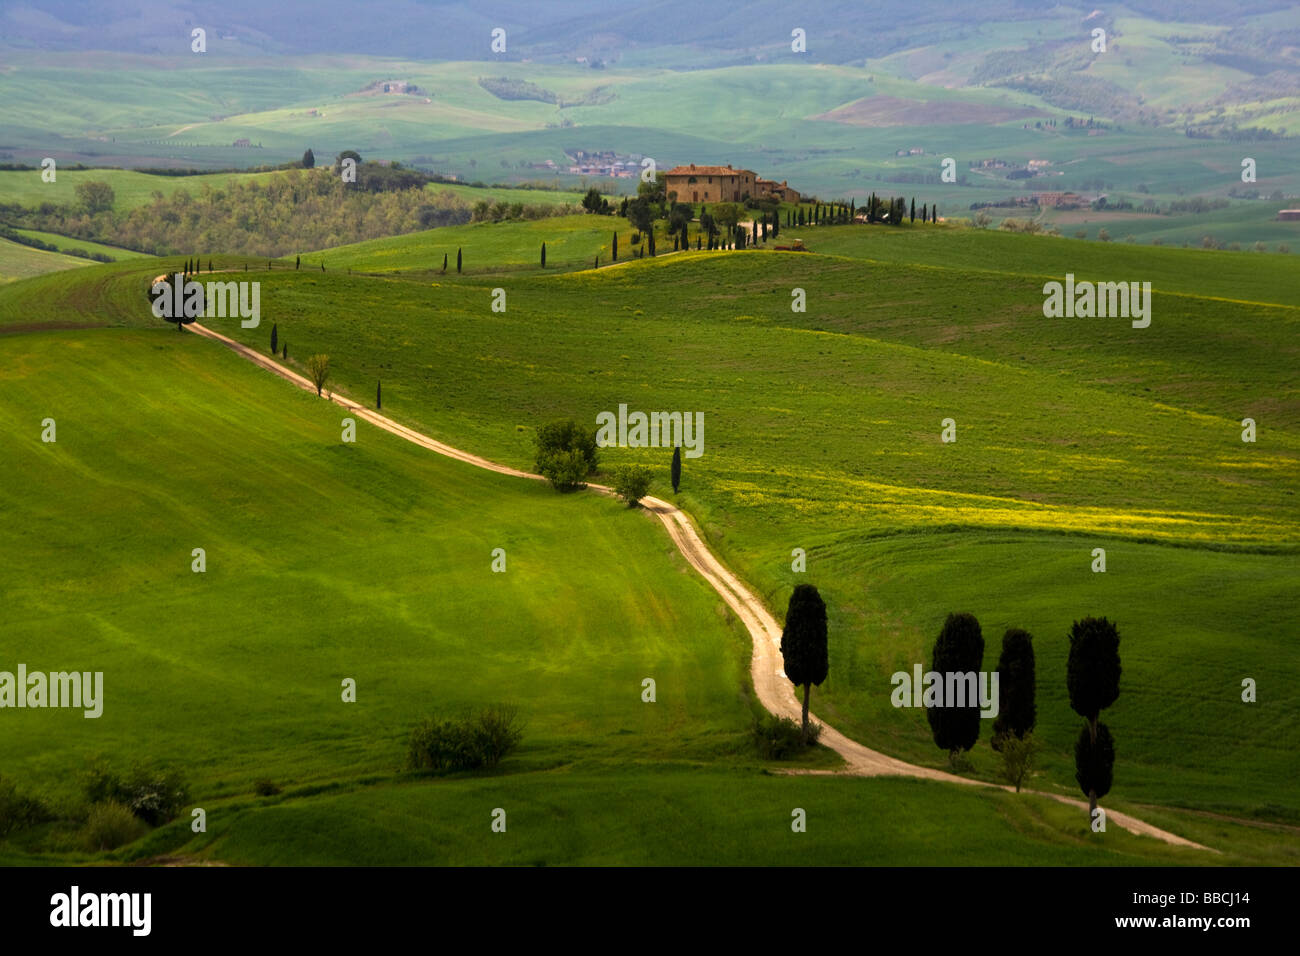 Country road lined with cypress tress leading to typical Tuscan farmhouse villa in the rolling hills of Tuscany, Italy. Stock Photo